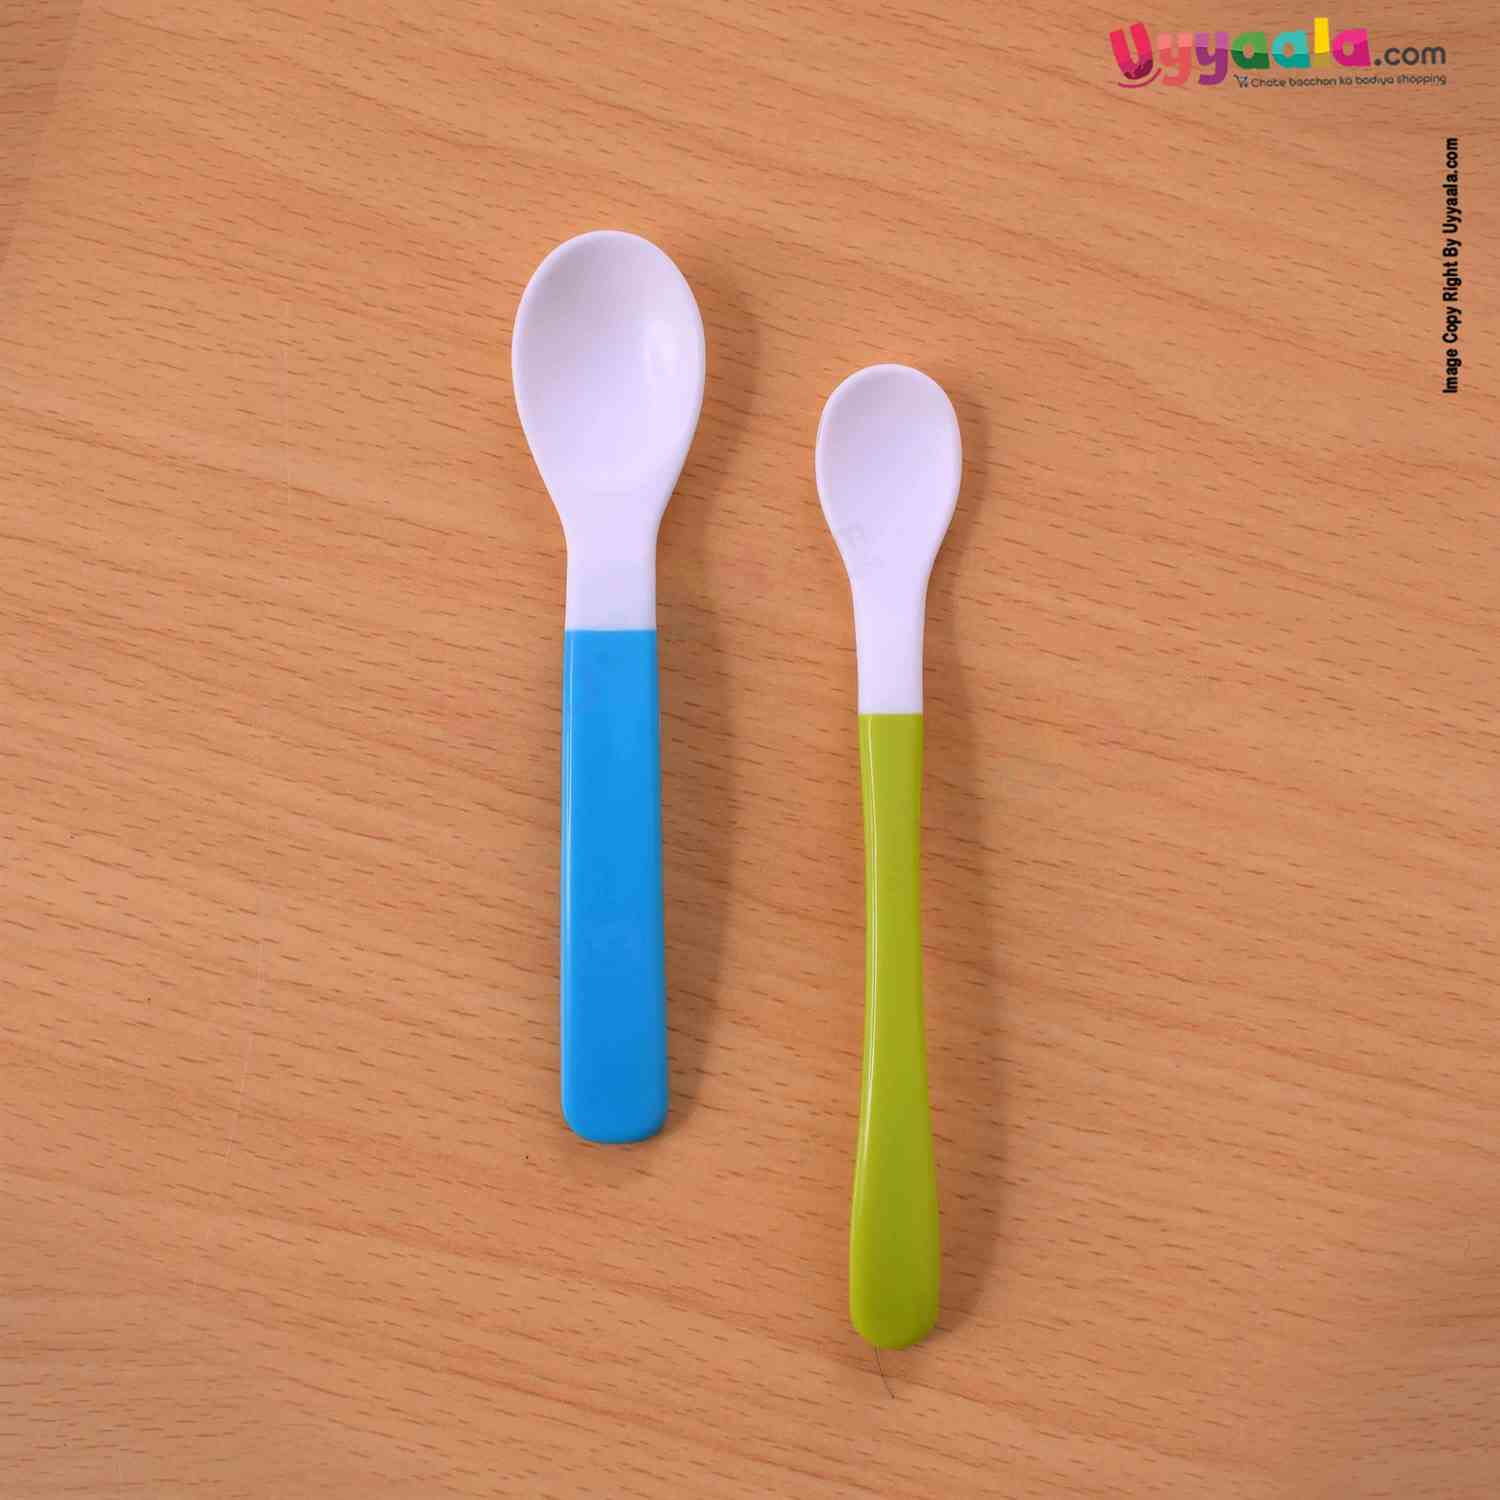 ROVCO Heat Discoloration Silicone Spoons Twin Pack For Babies 6+m Age - Blue & Green